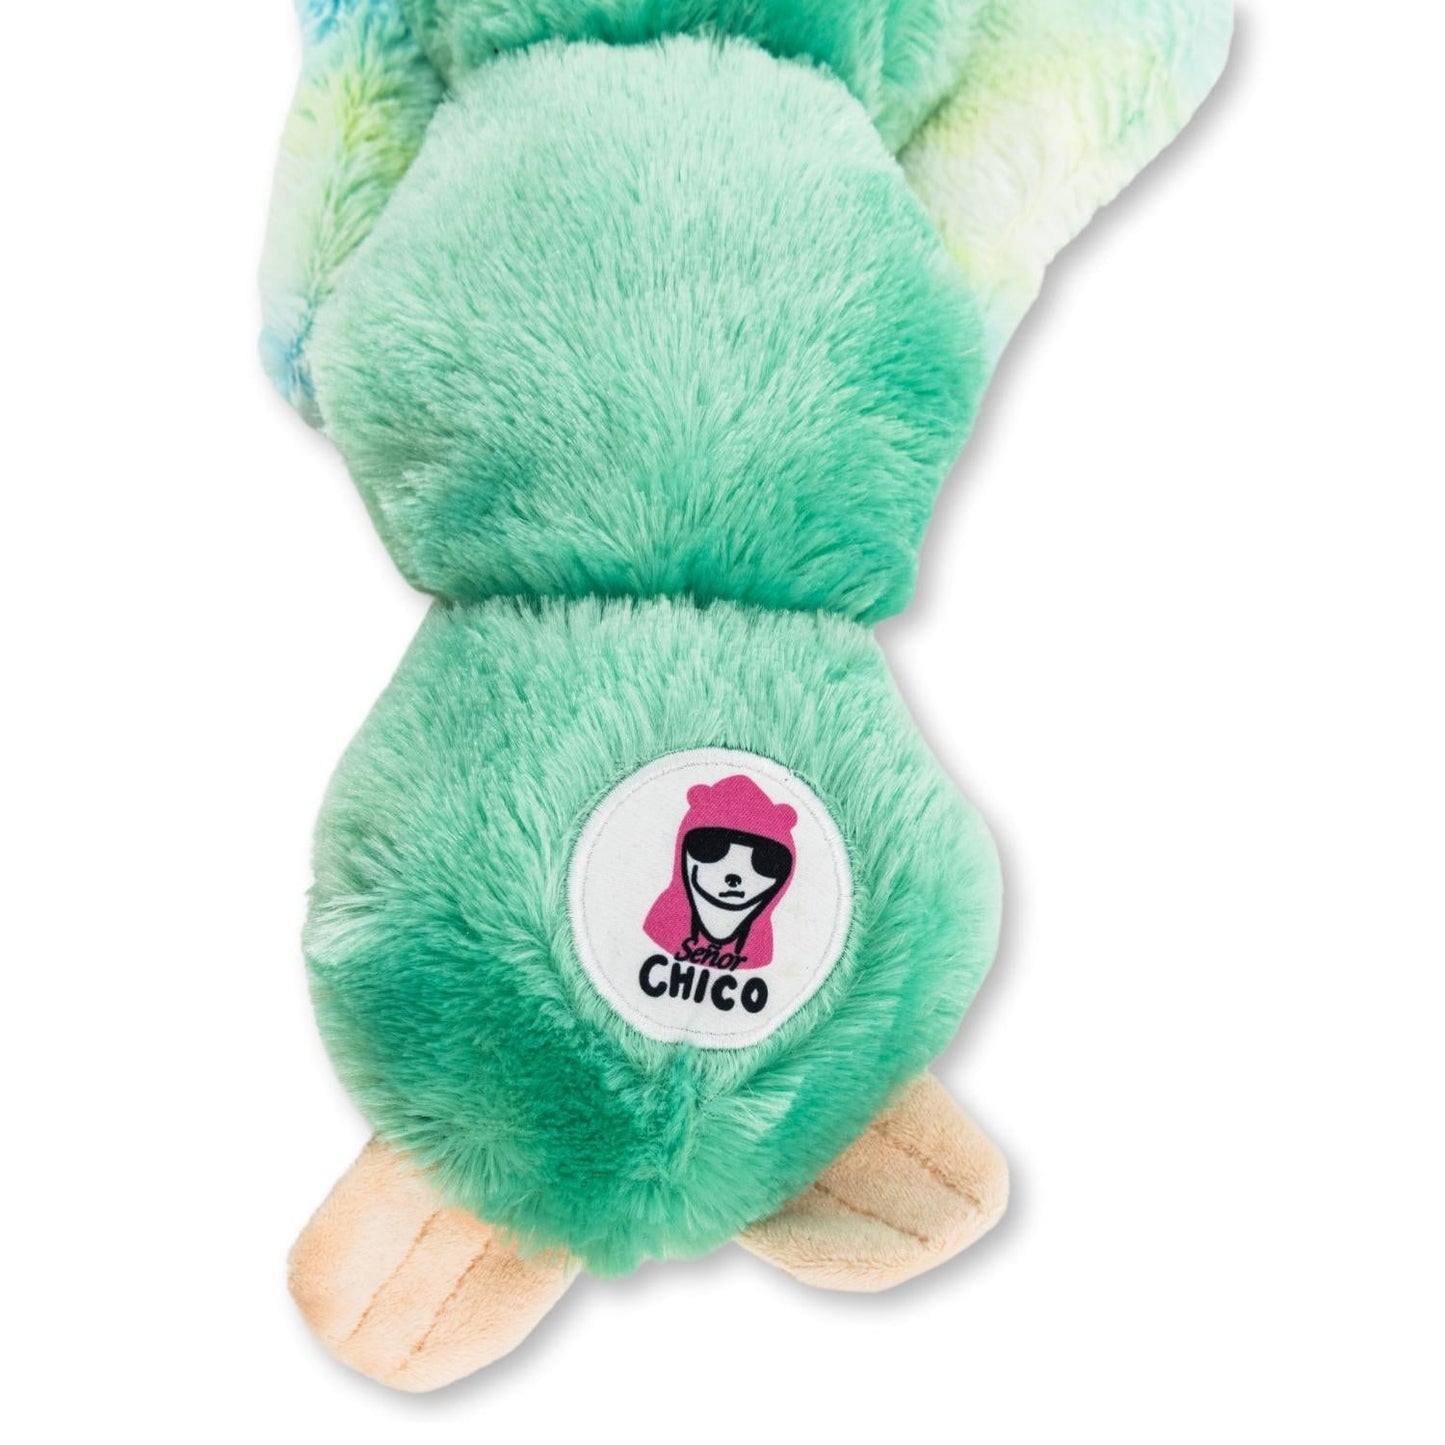 Winged Mint Sloth Magical Creature Squeaking Plush Dog Toy by American Pet Supplies